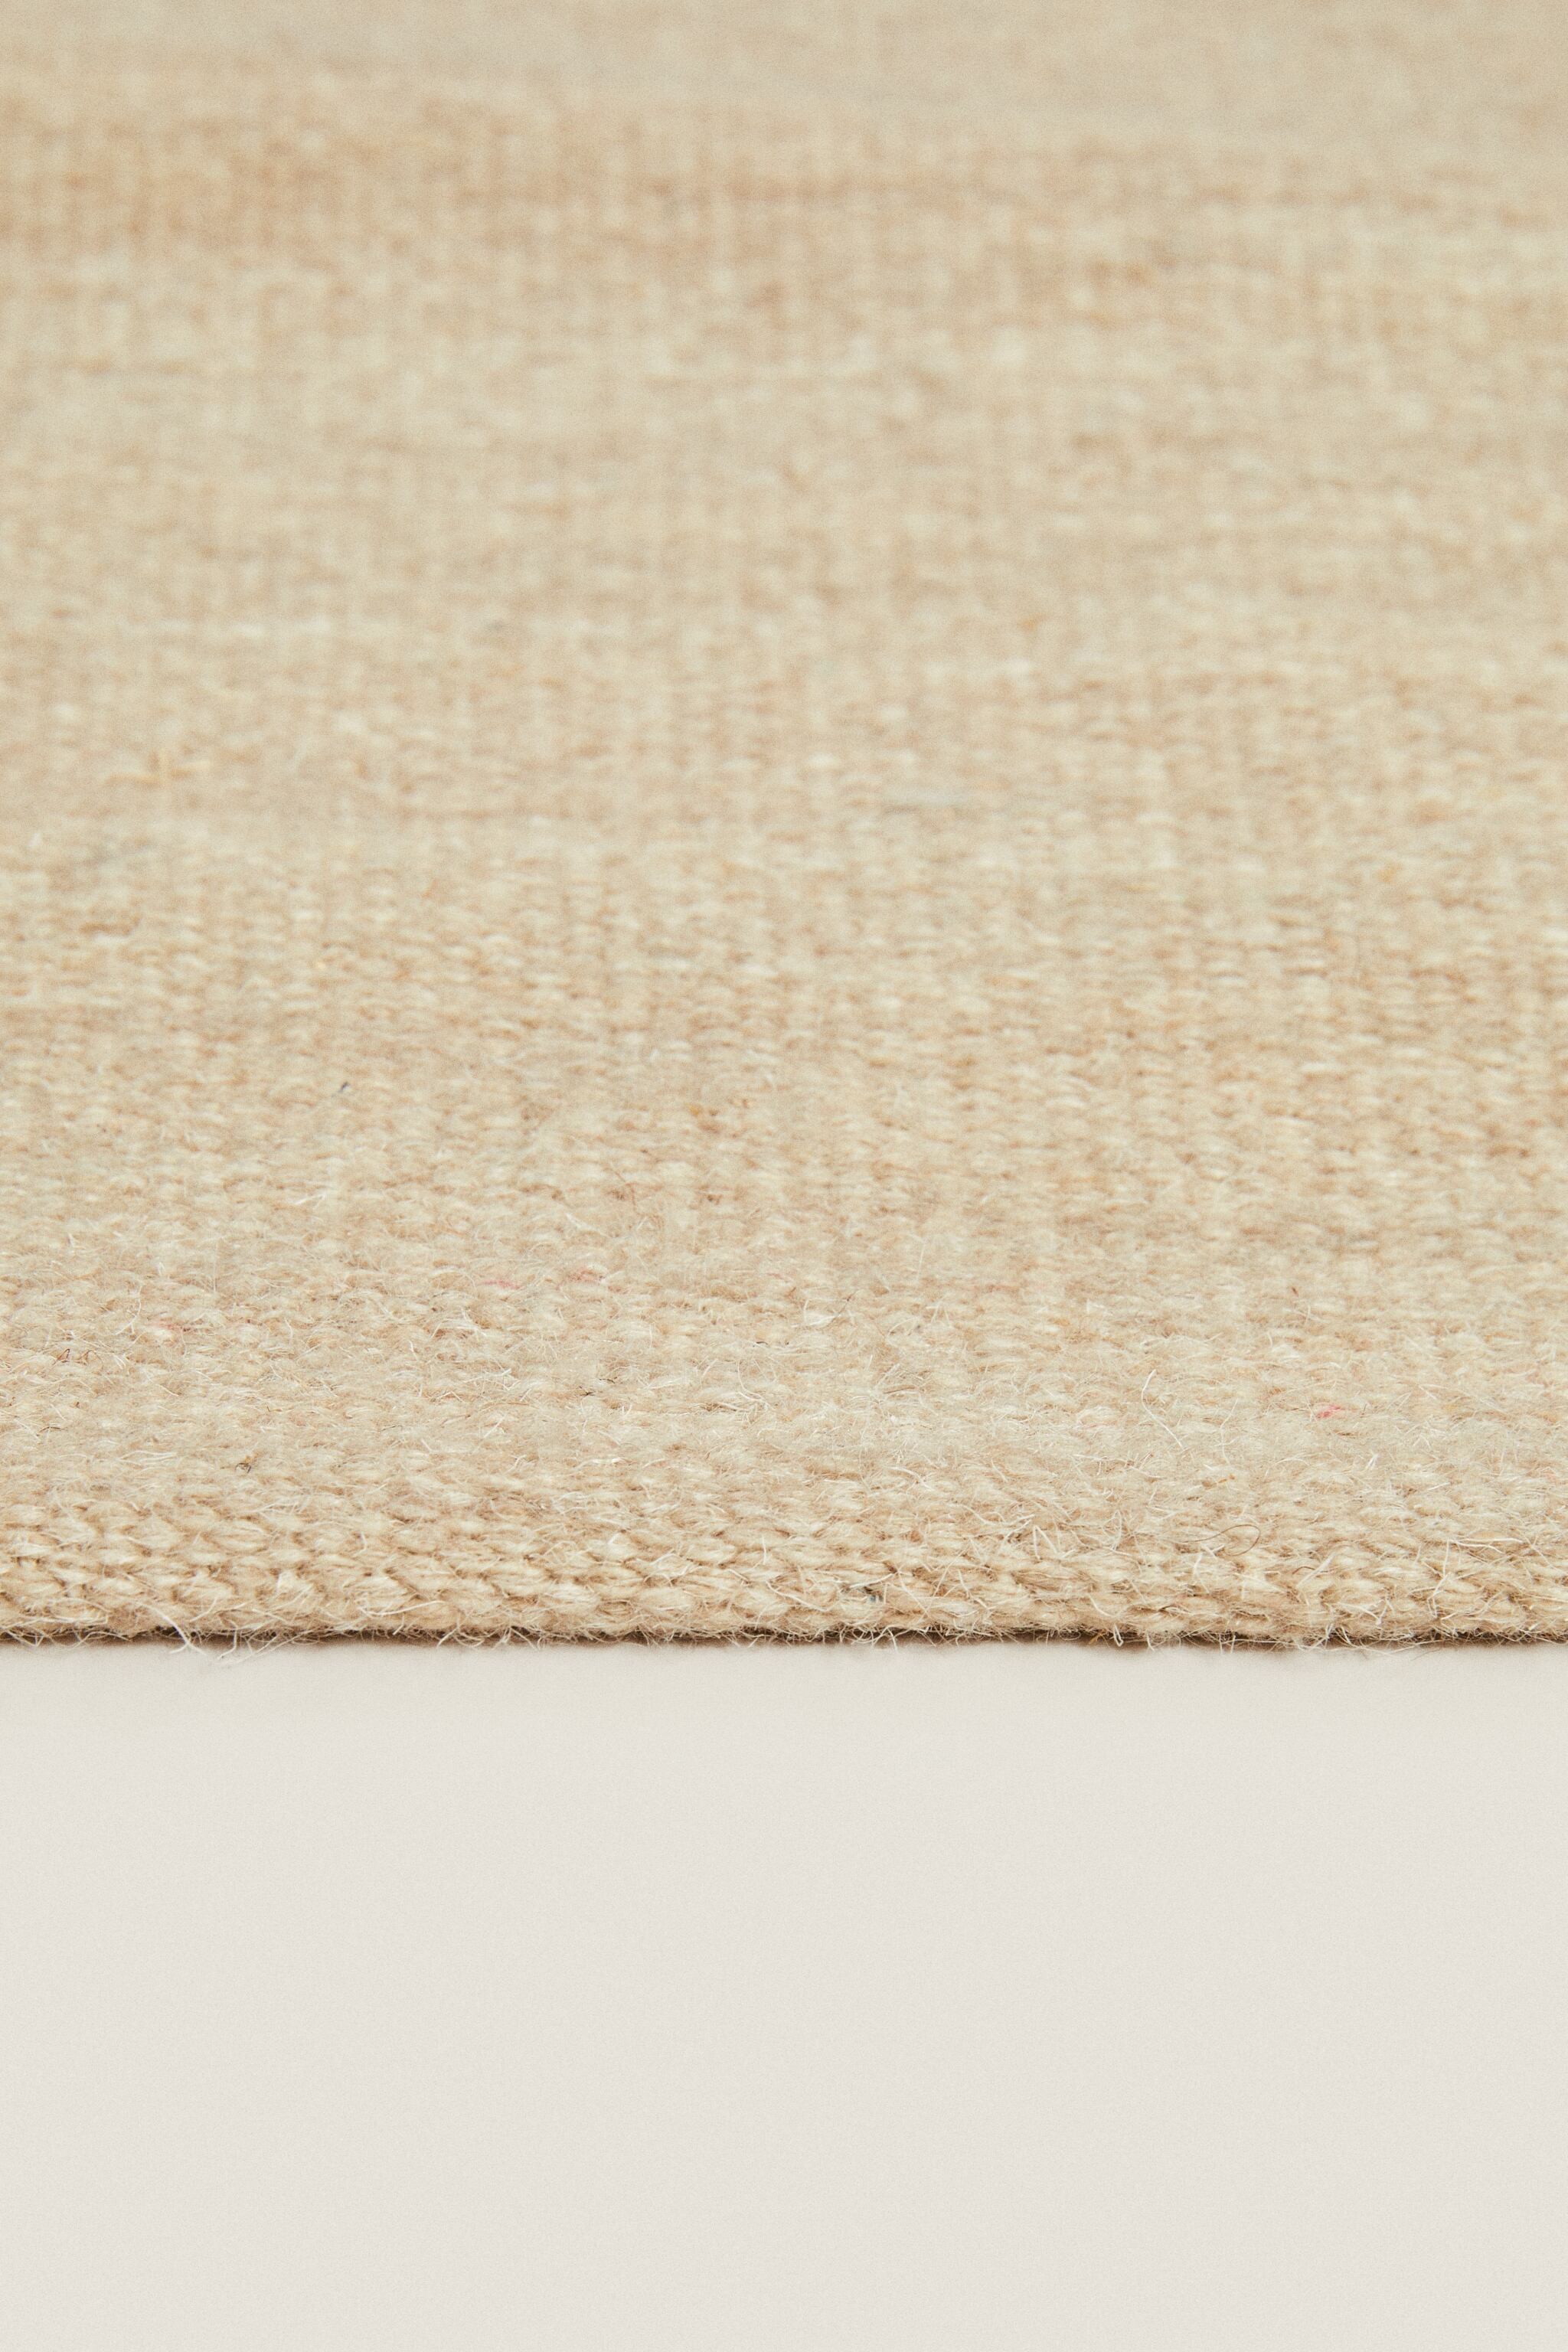 WOOL AND COTTON RUG